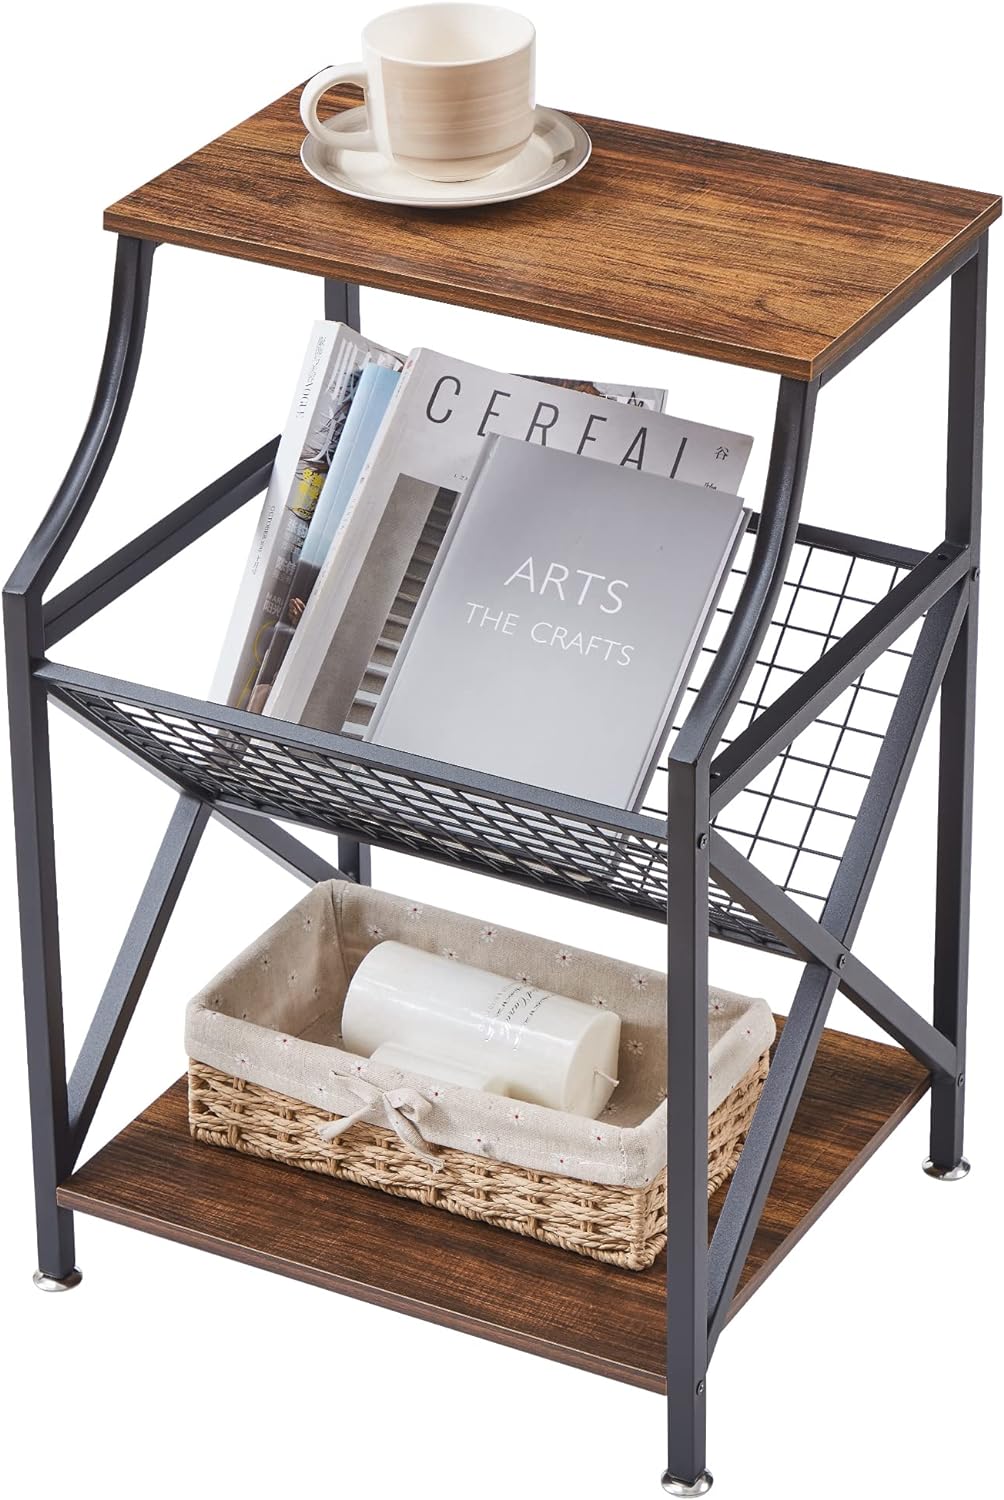 3-Tier End Table with Storage Magazine Holder